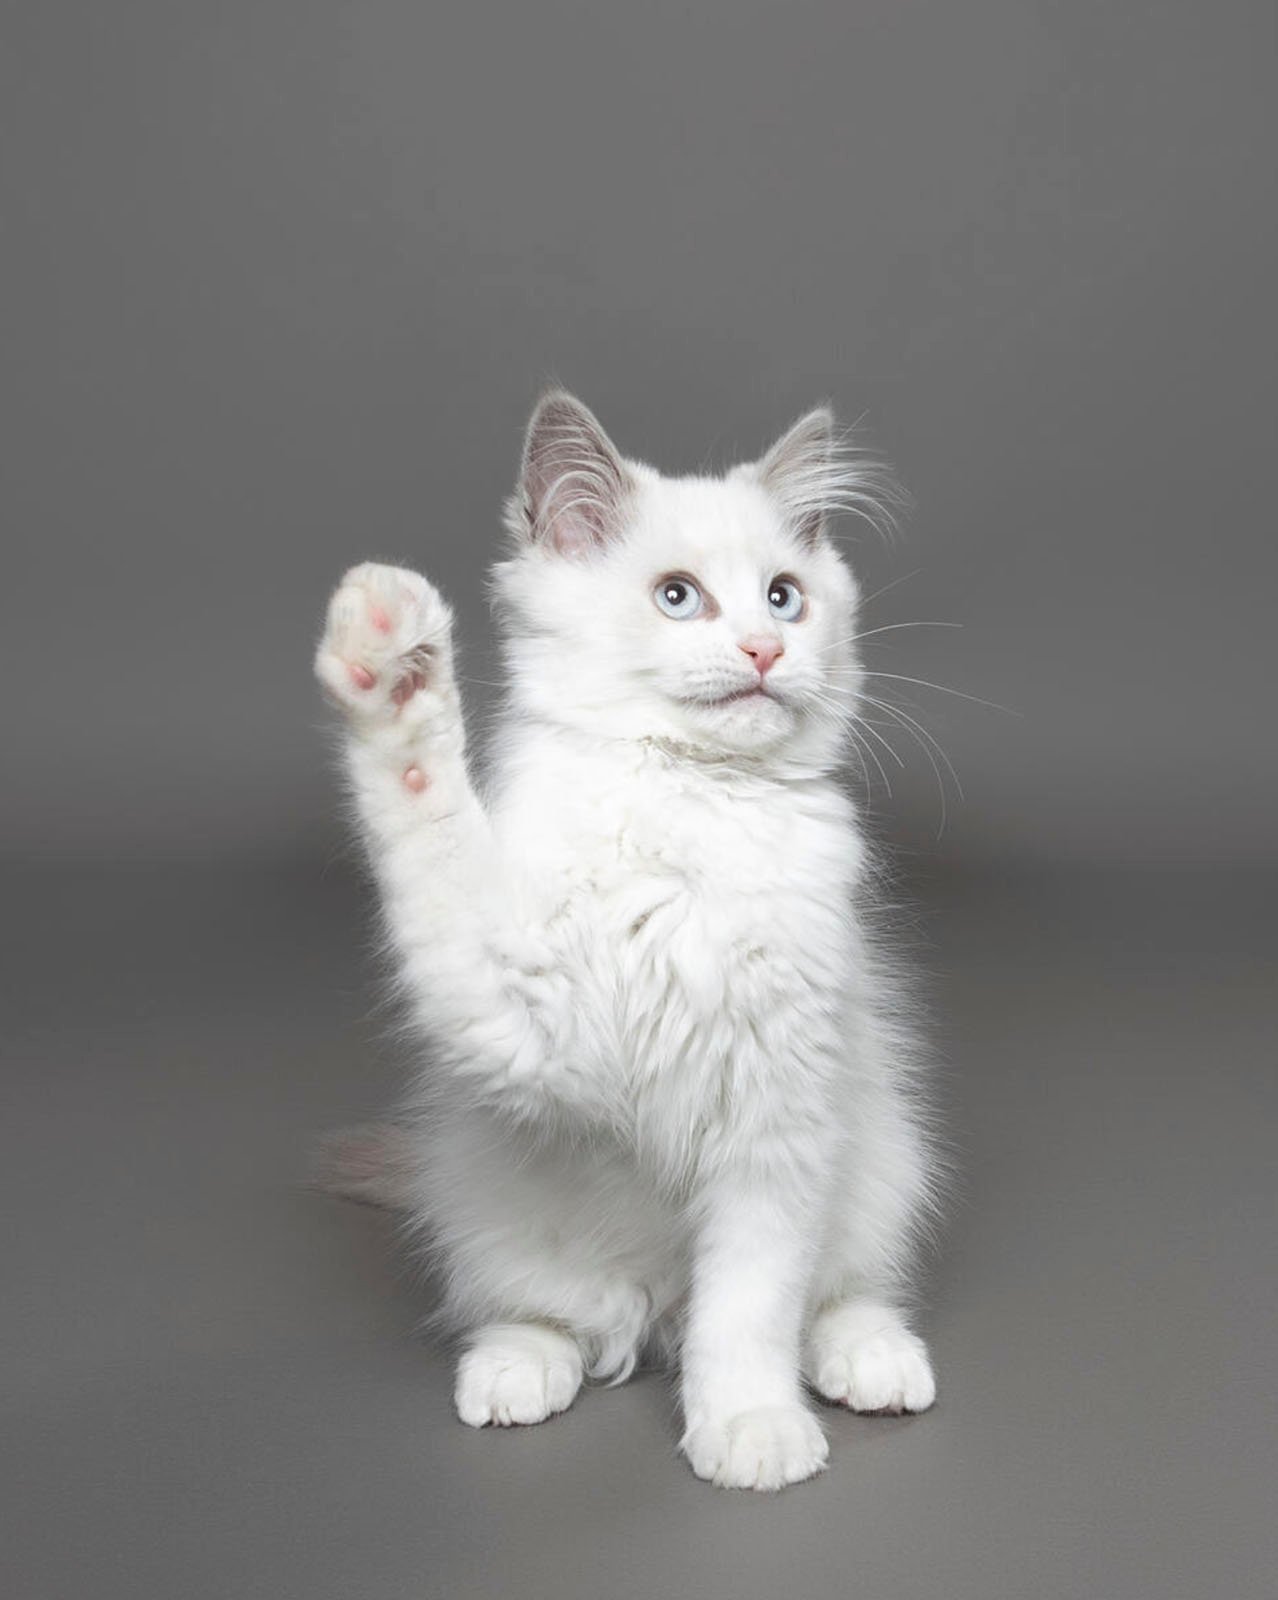 A young white fluffy cat sits against a grey background, playfully raising one paw as if waving or reaching for something. Its eyes look alert and curious.